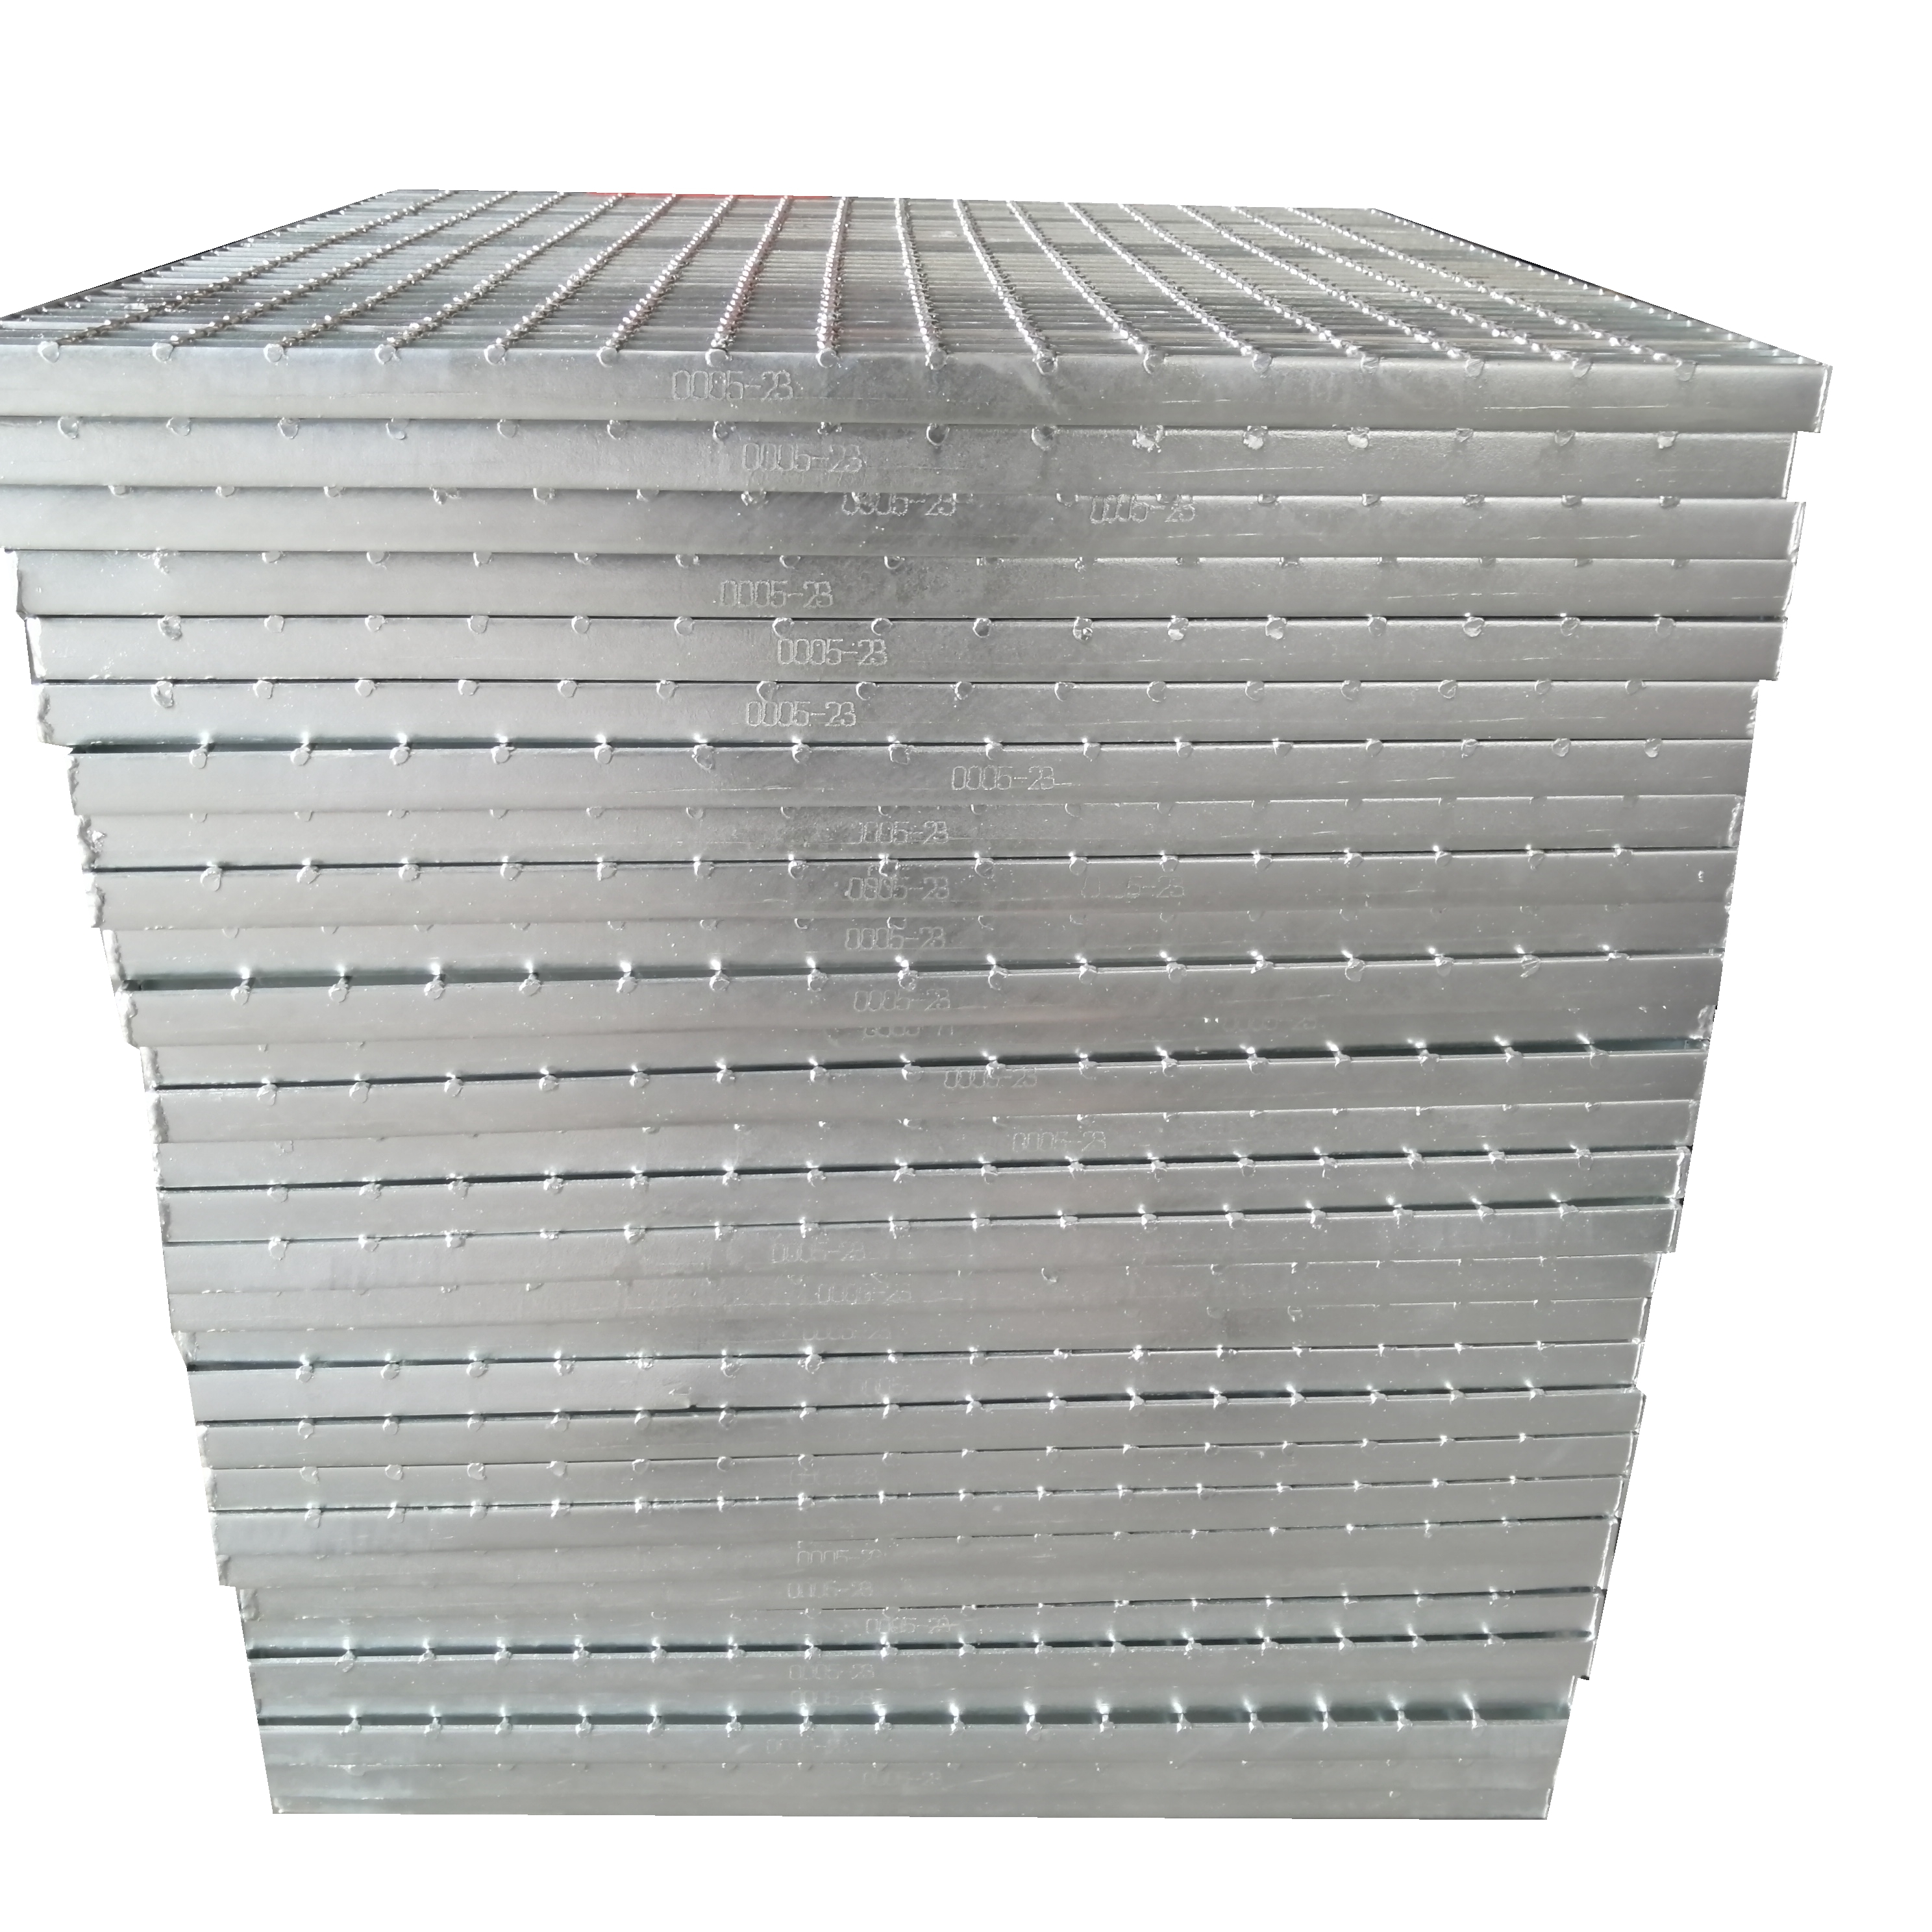 50 mm grating Hot selling catwalk decking grating with high quality